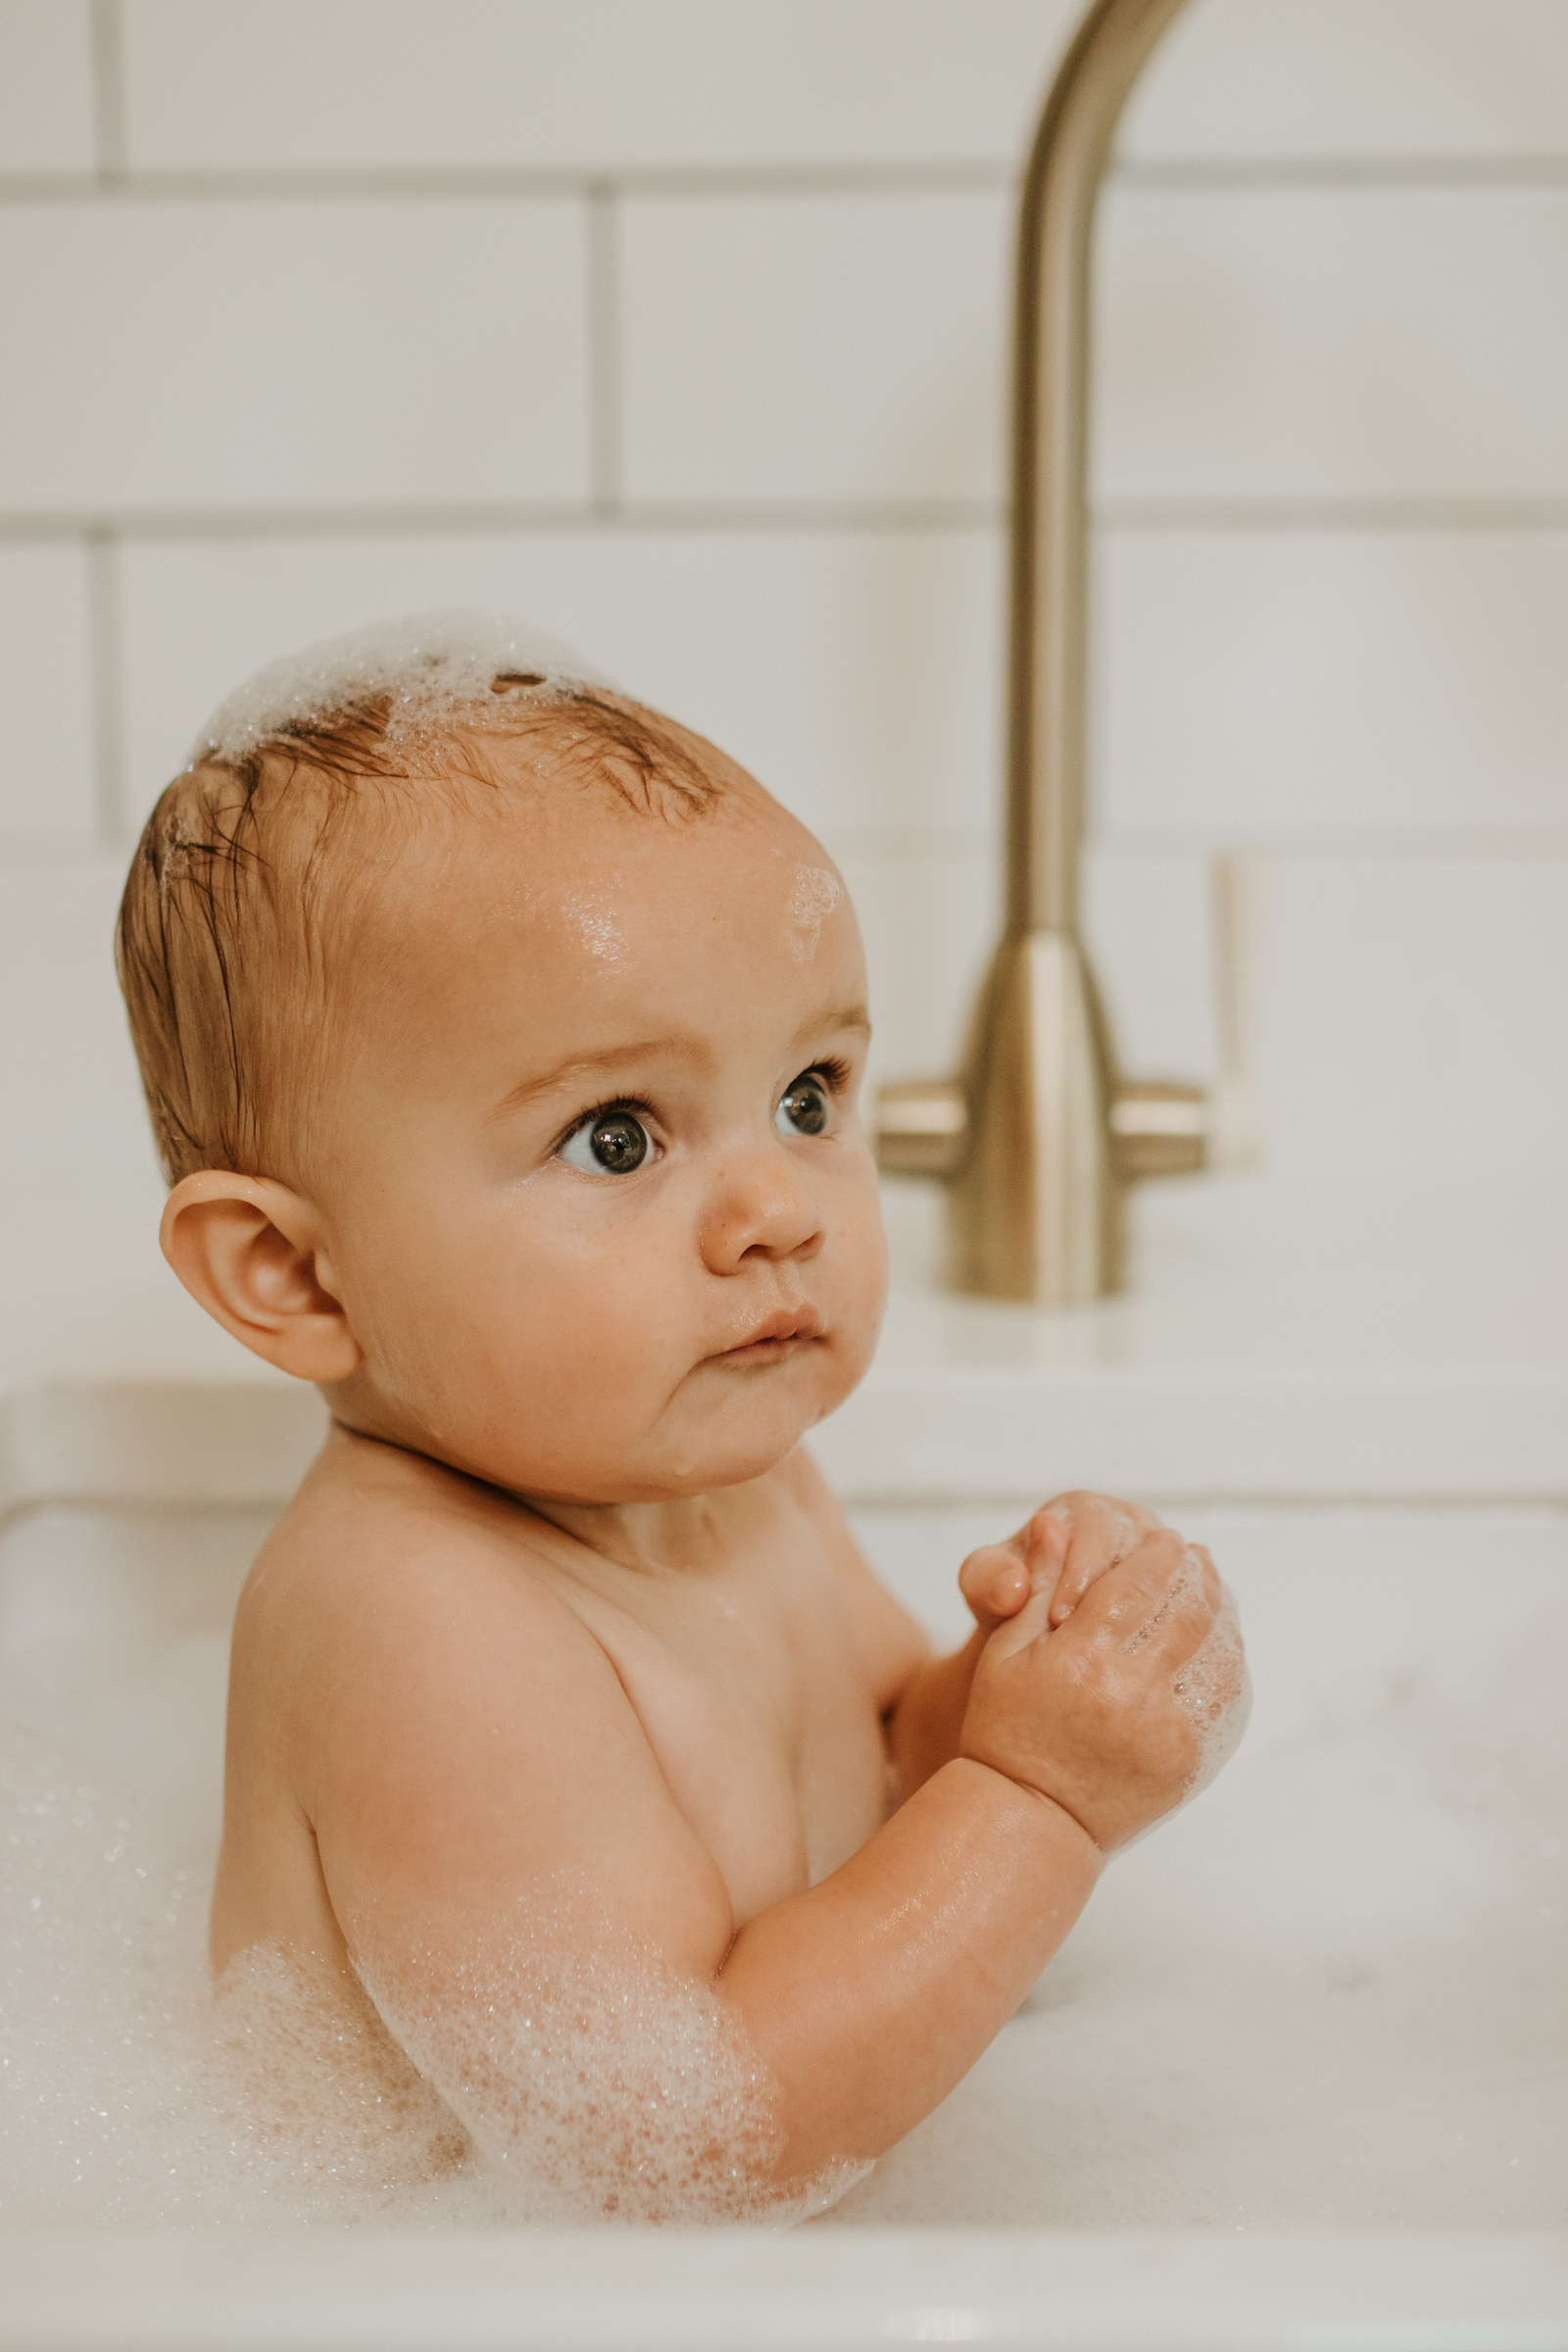 Baby having a sink bath in the kitchen | In home baby photography session